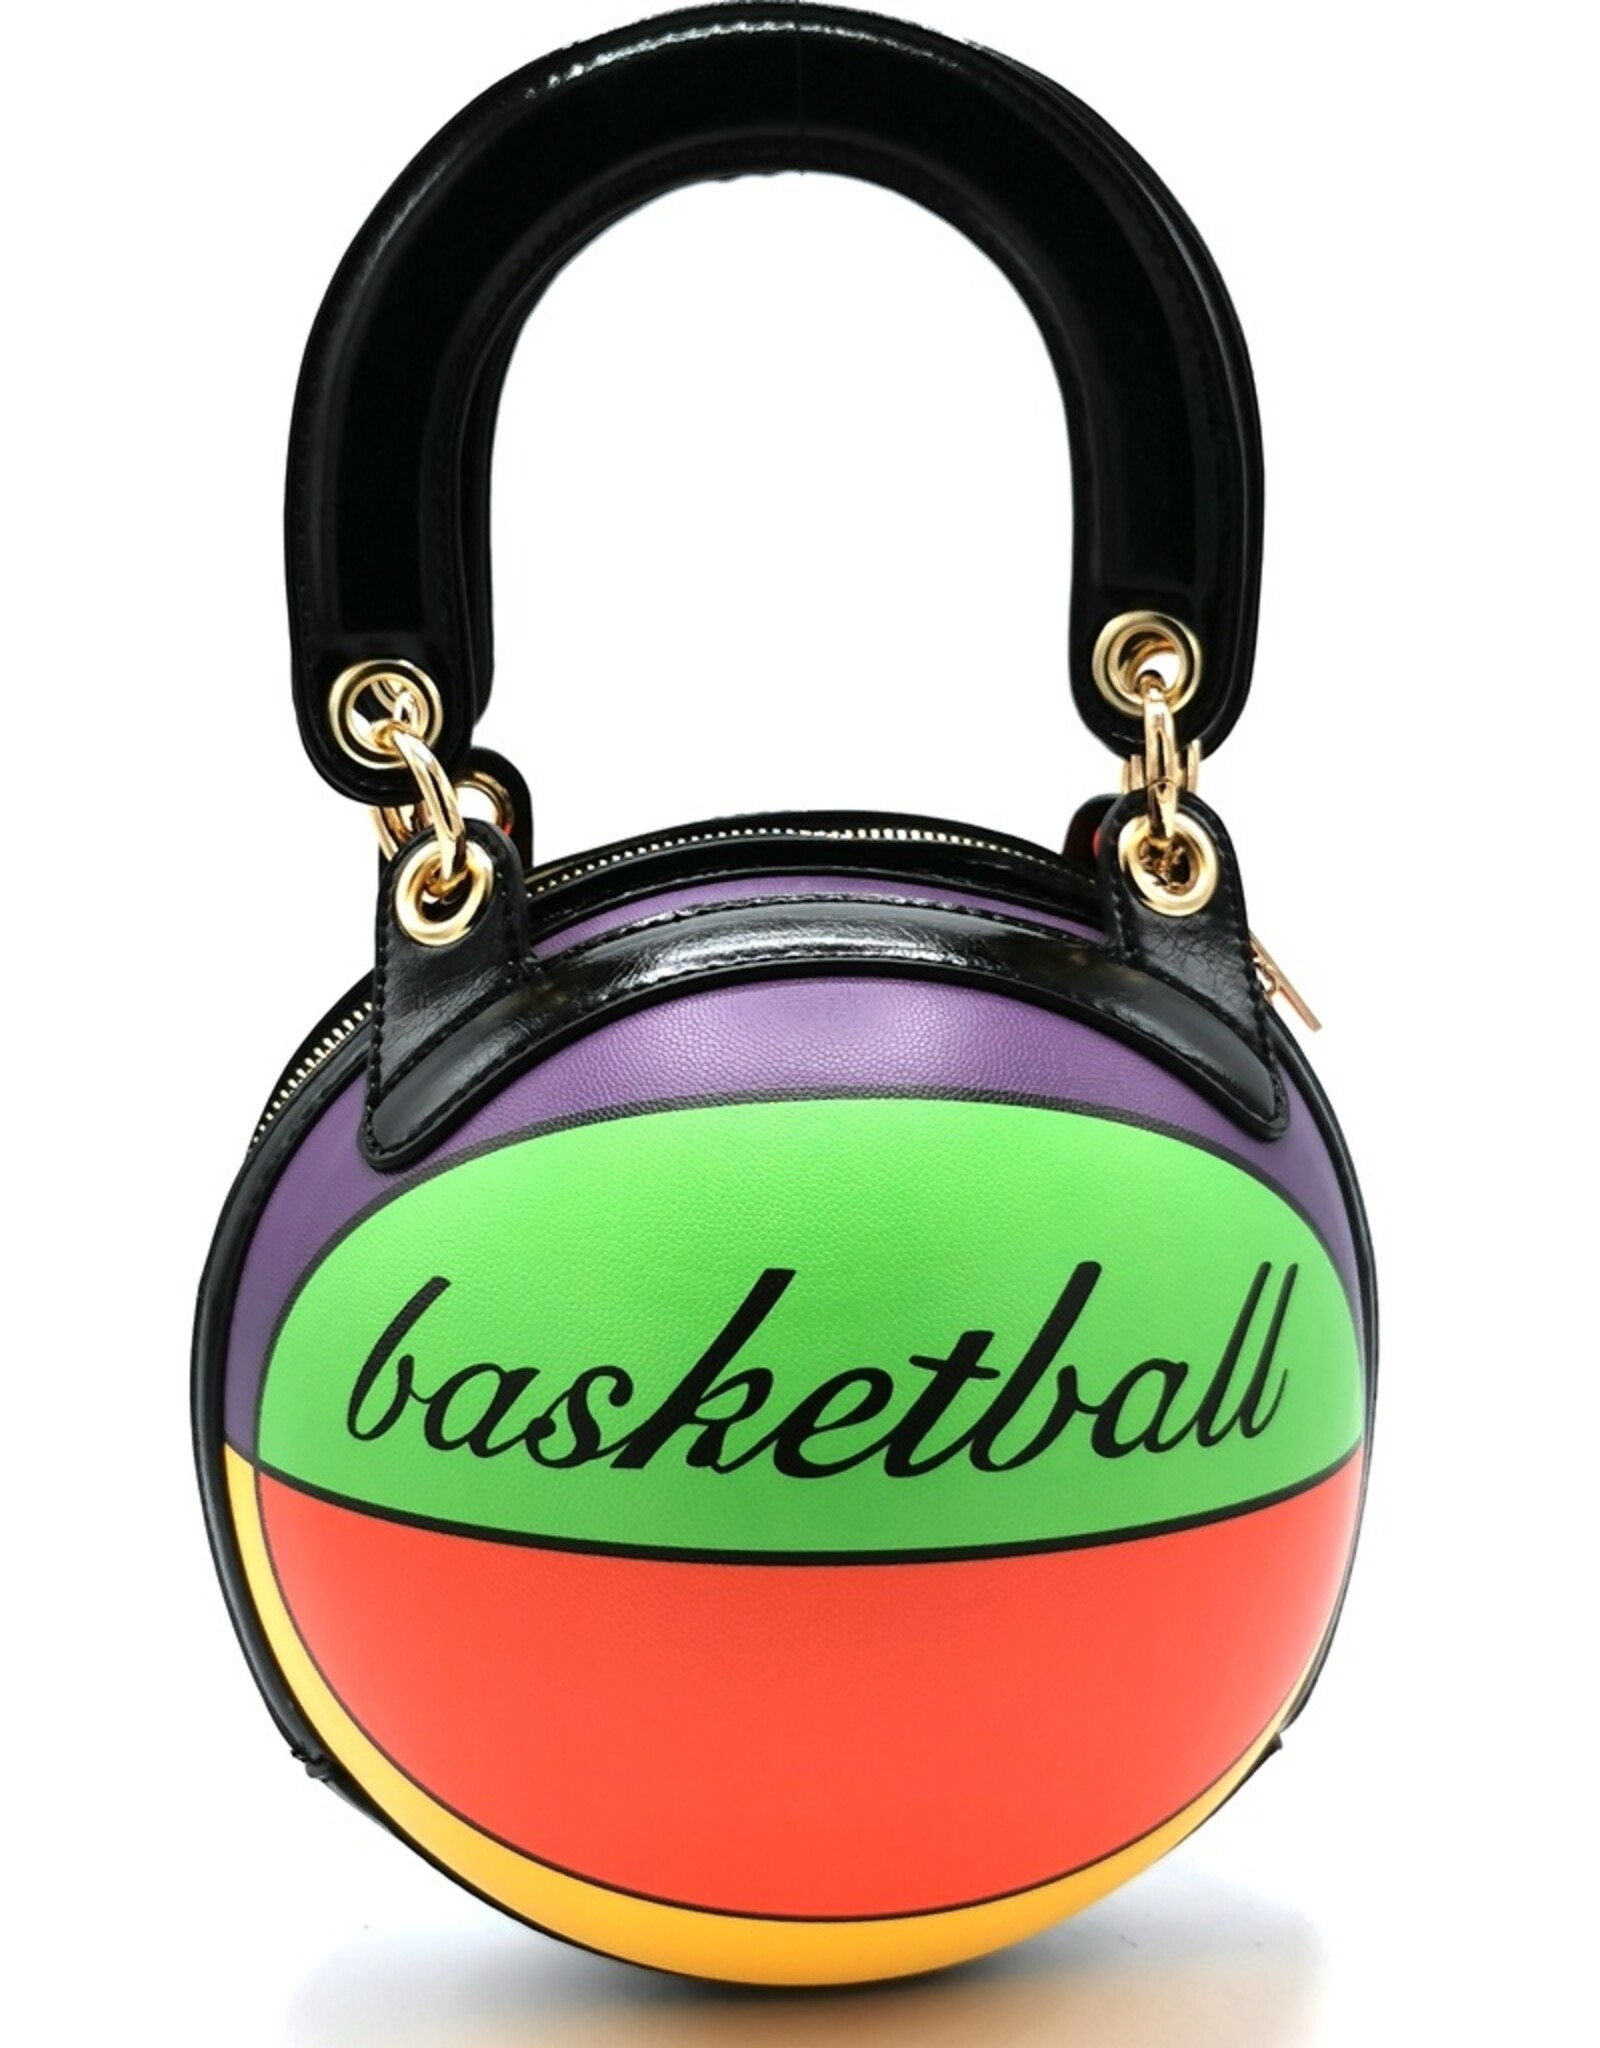 Systyle Fantasy bags - Fantasy bag Basketball Purple/red